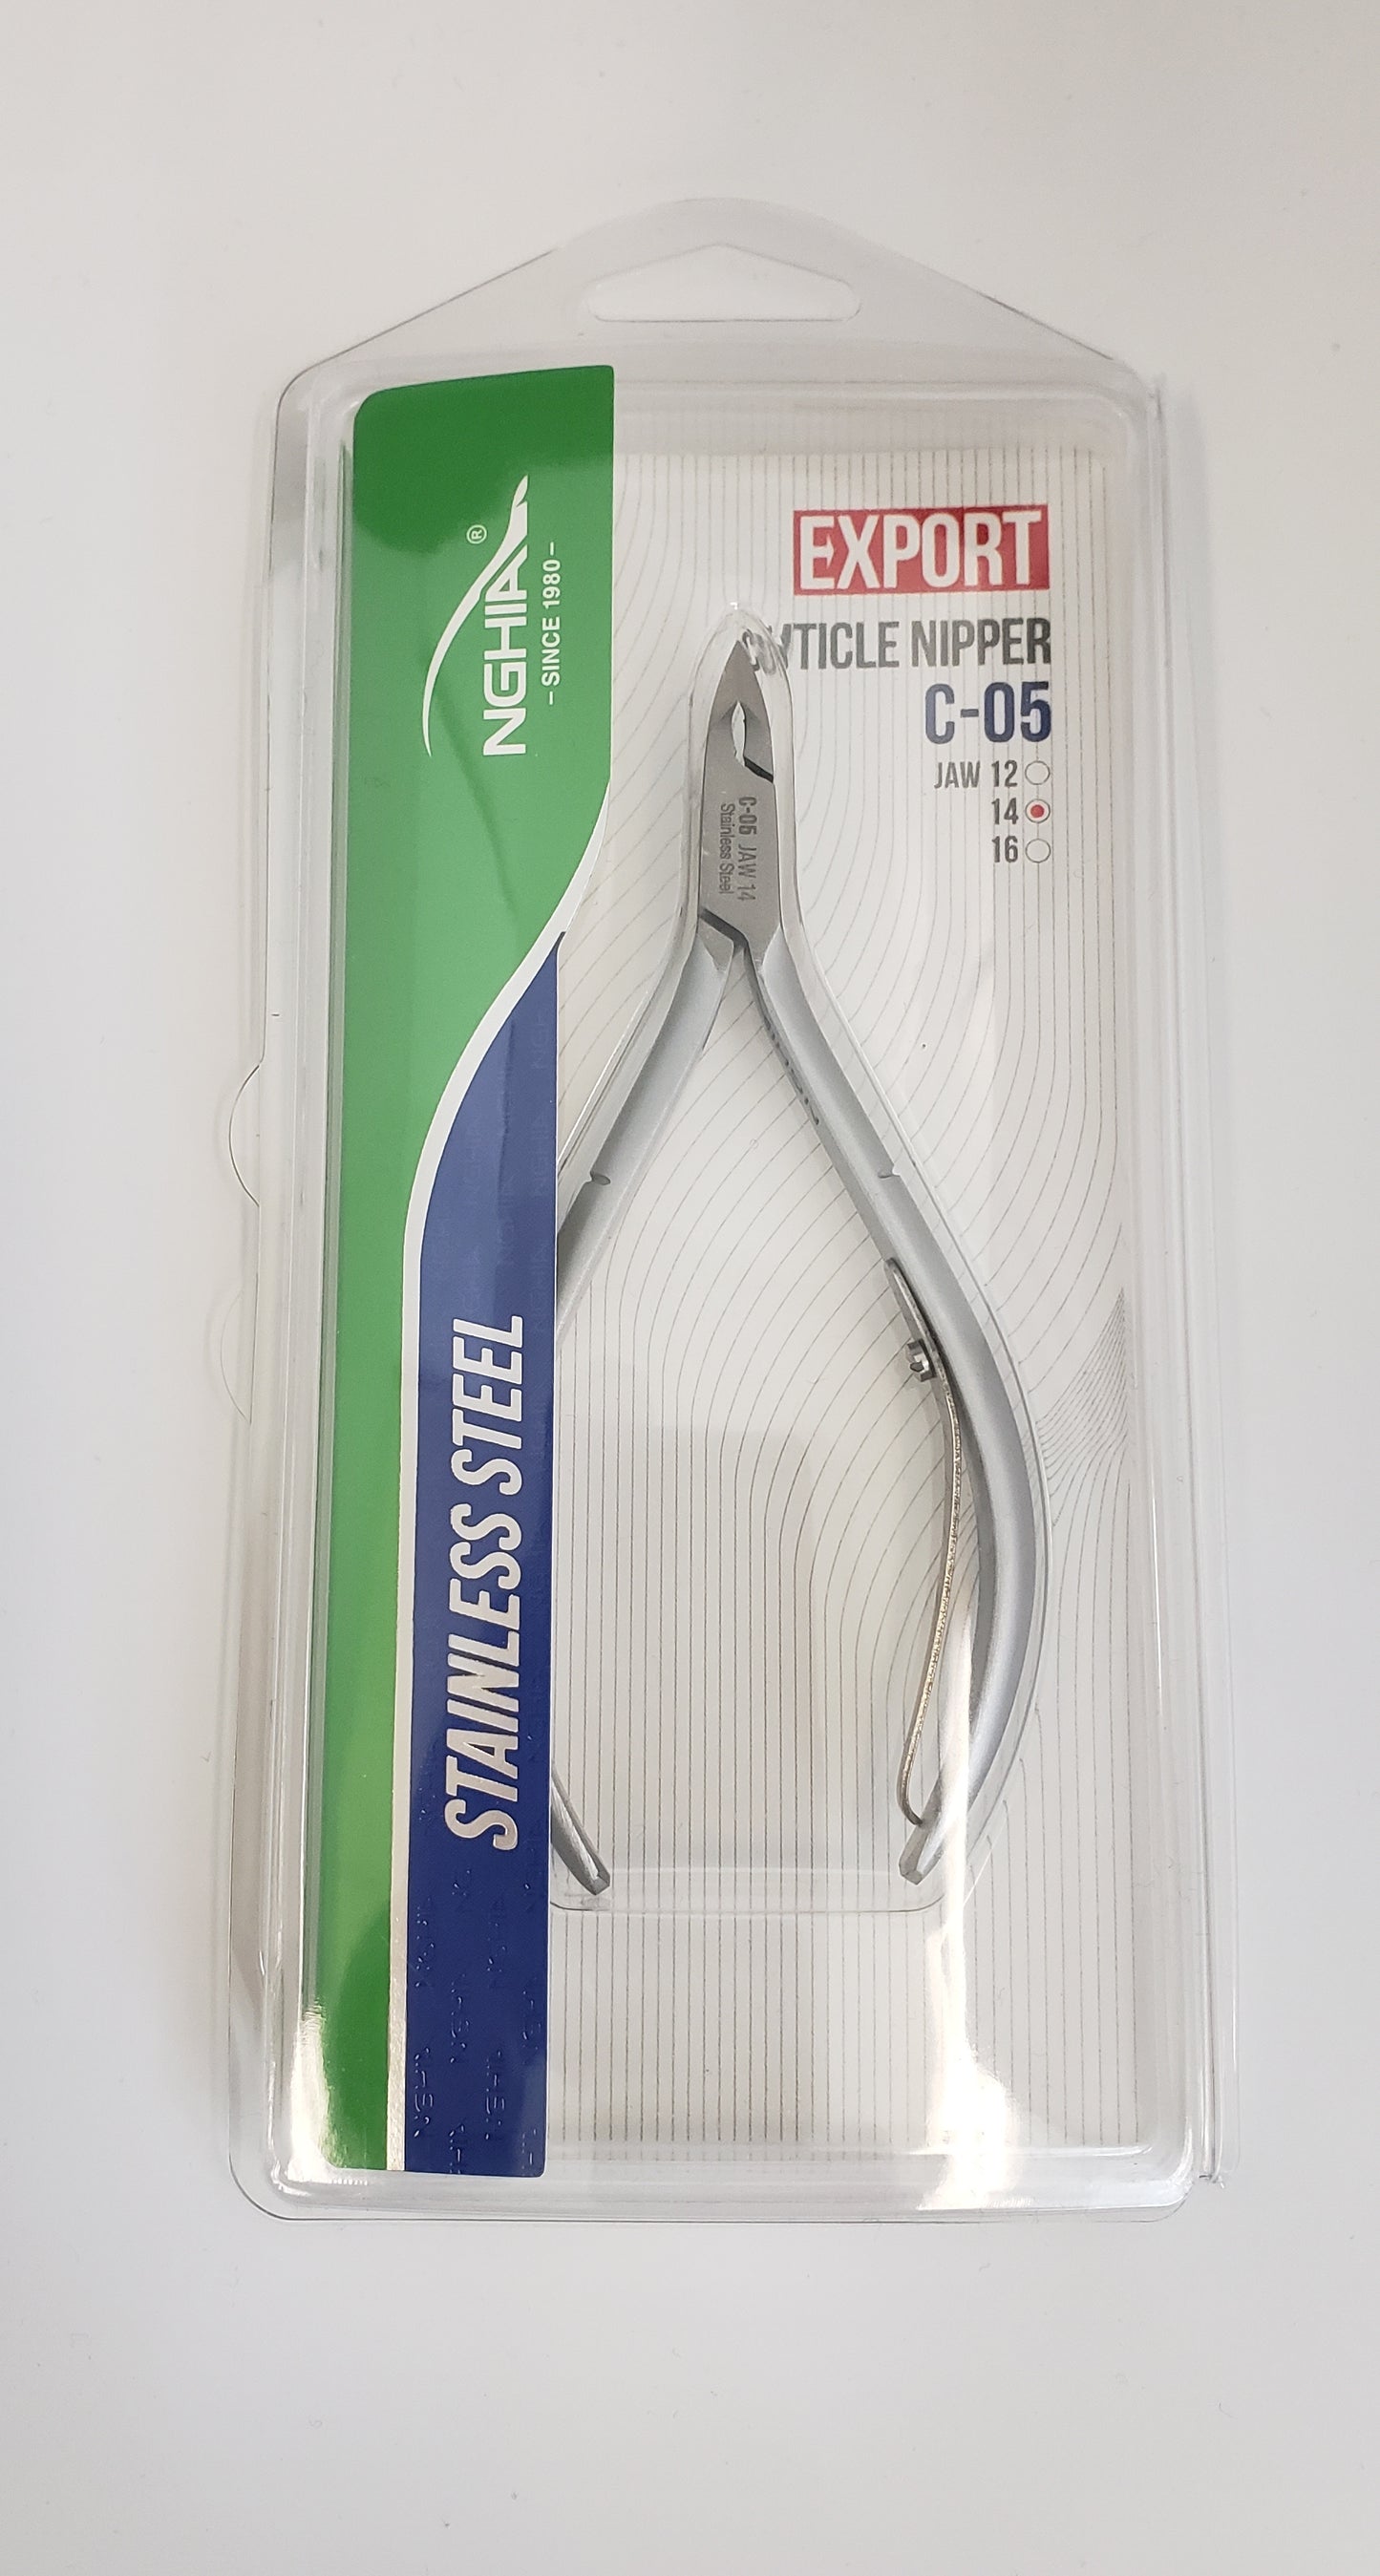 Nghia EXPORT - Stainless Steel Cuticle Nipper C-05 (Previously D-04) - Jaw #14